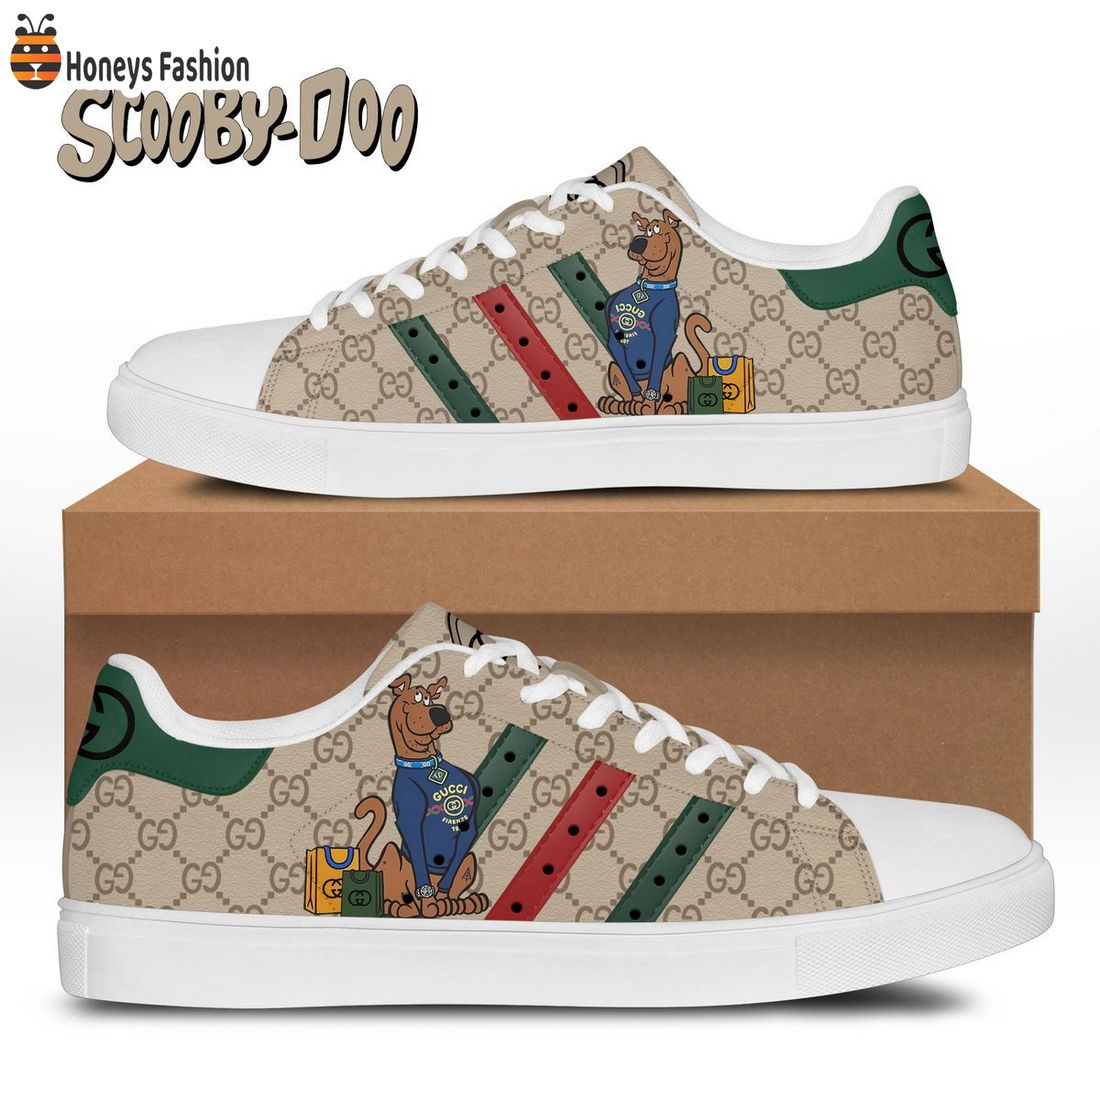 TRENDING Scooby Doo Gucci Adidas Stan Smith Shoes